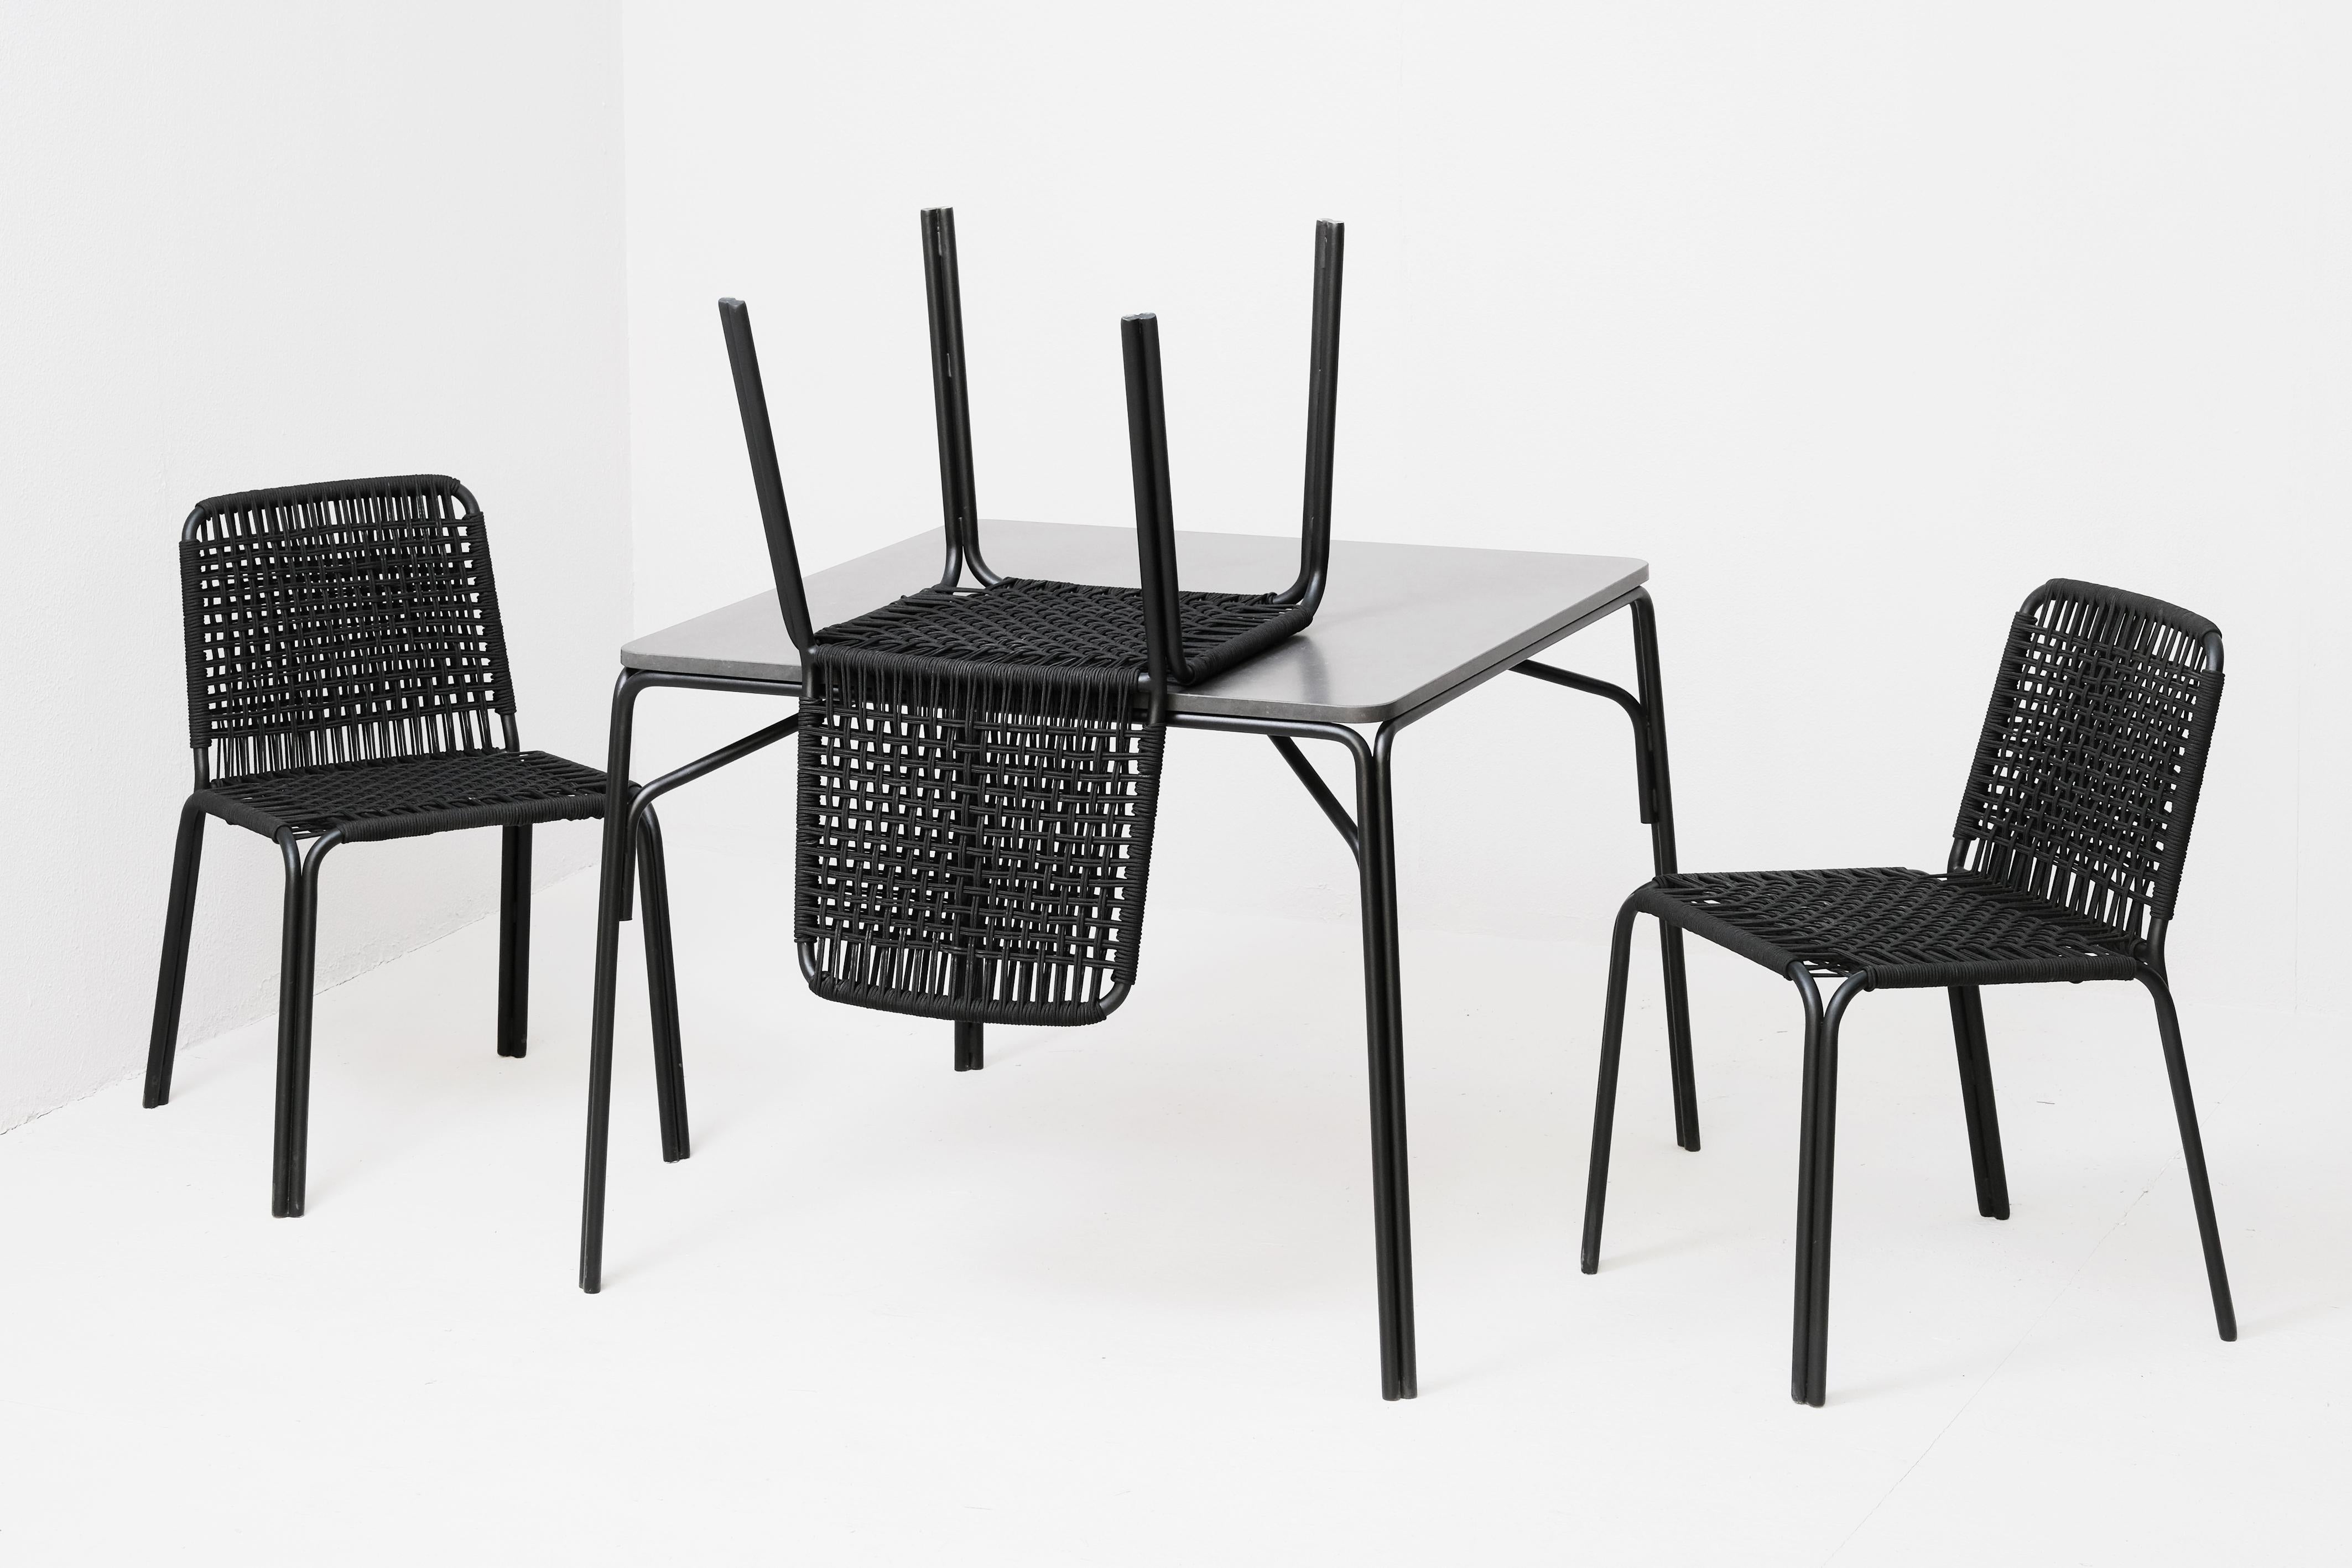 Penca is a line of outdoor furniture with a strong Mexican identity, designed for residential spaces as well as for common areas of restaurants or boutique hotels.
The concept of the Penca family, designed by Francisco Torres and Rosa Hanhausen